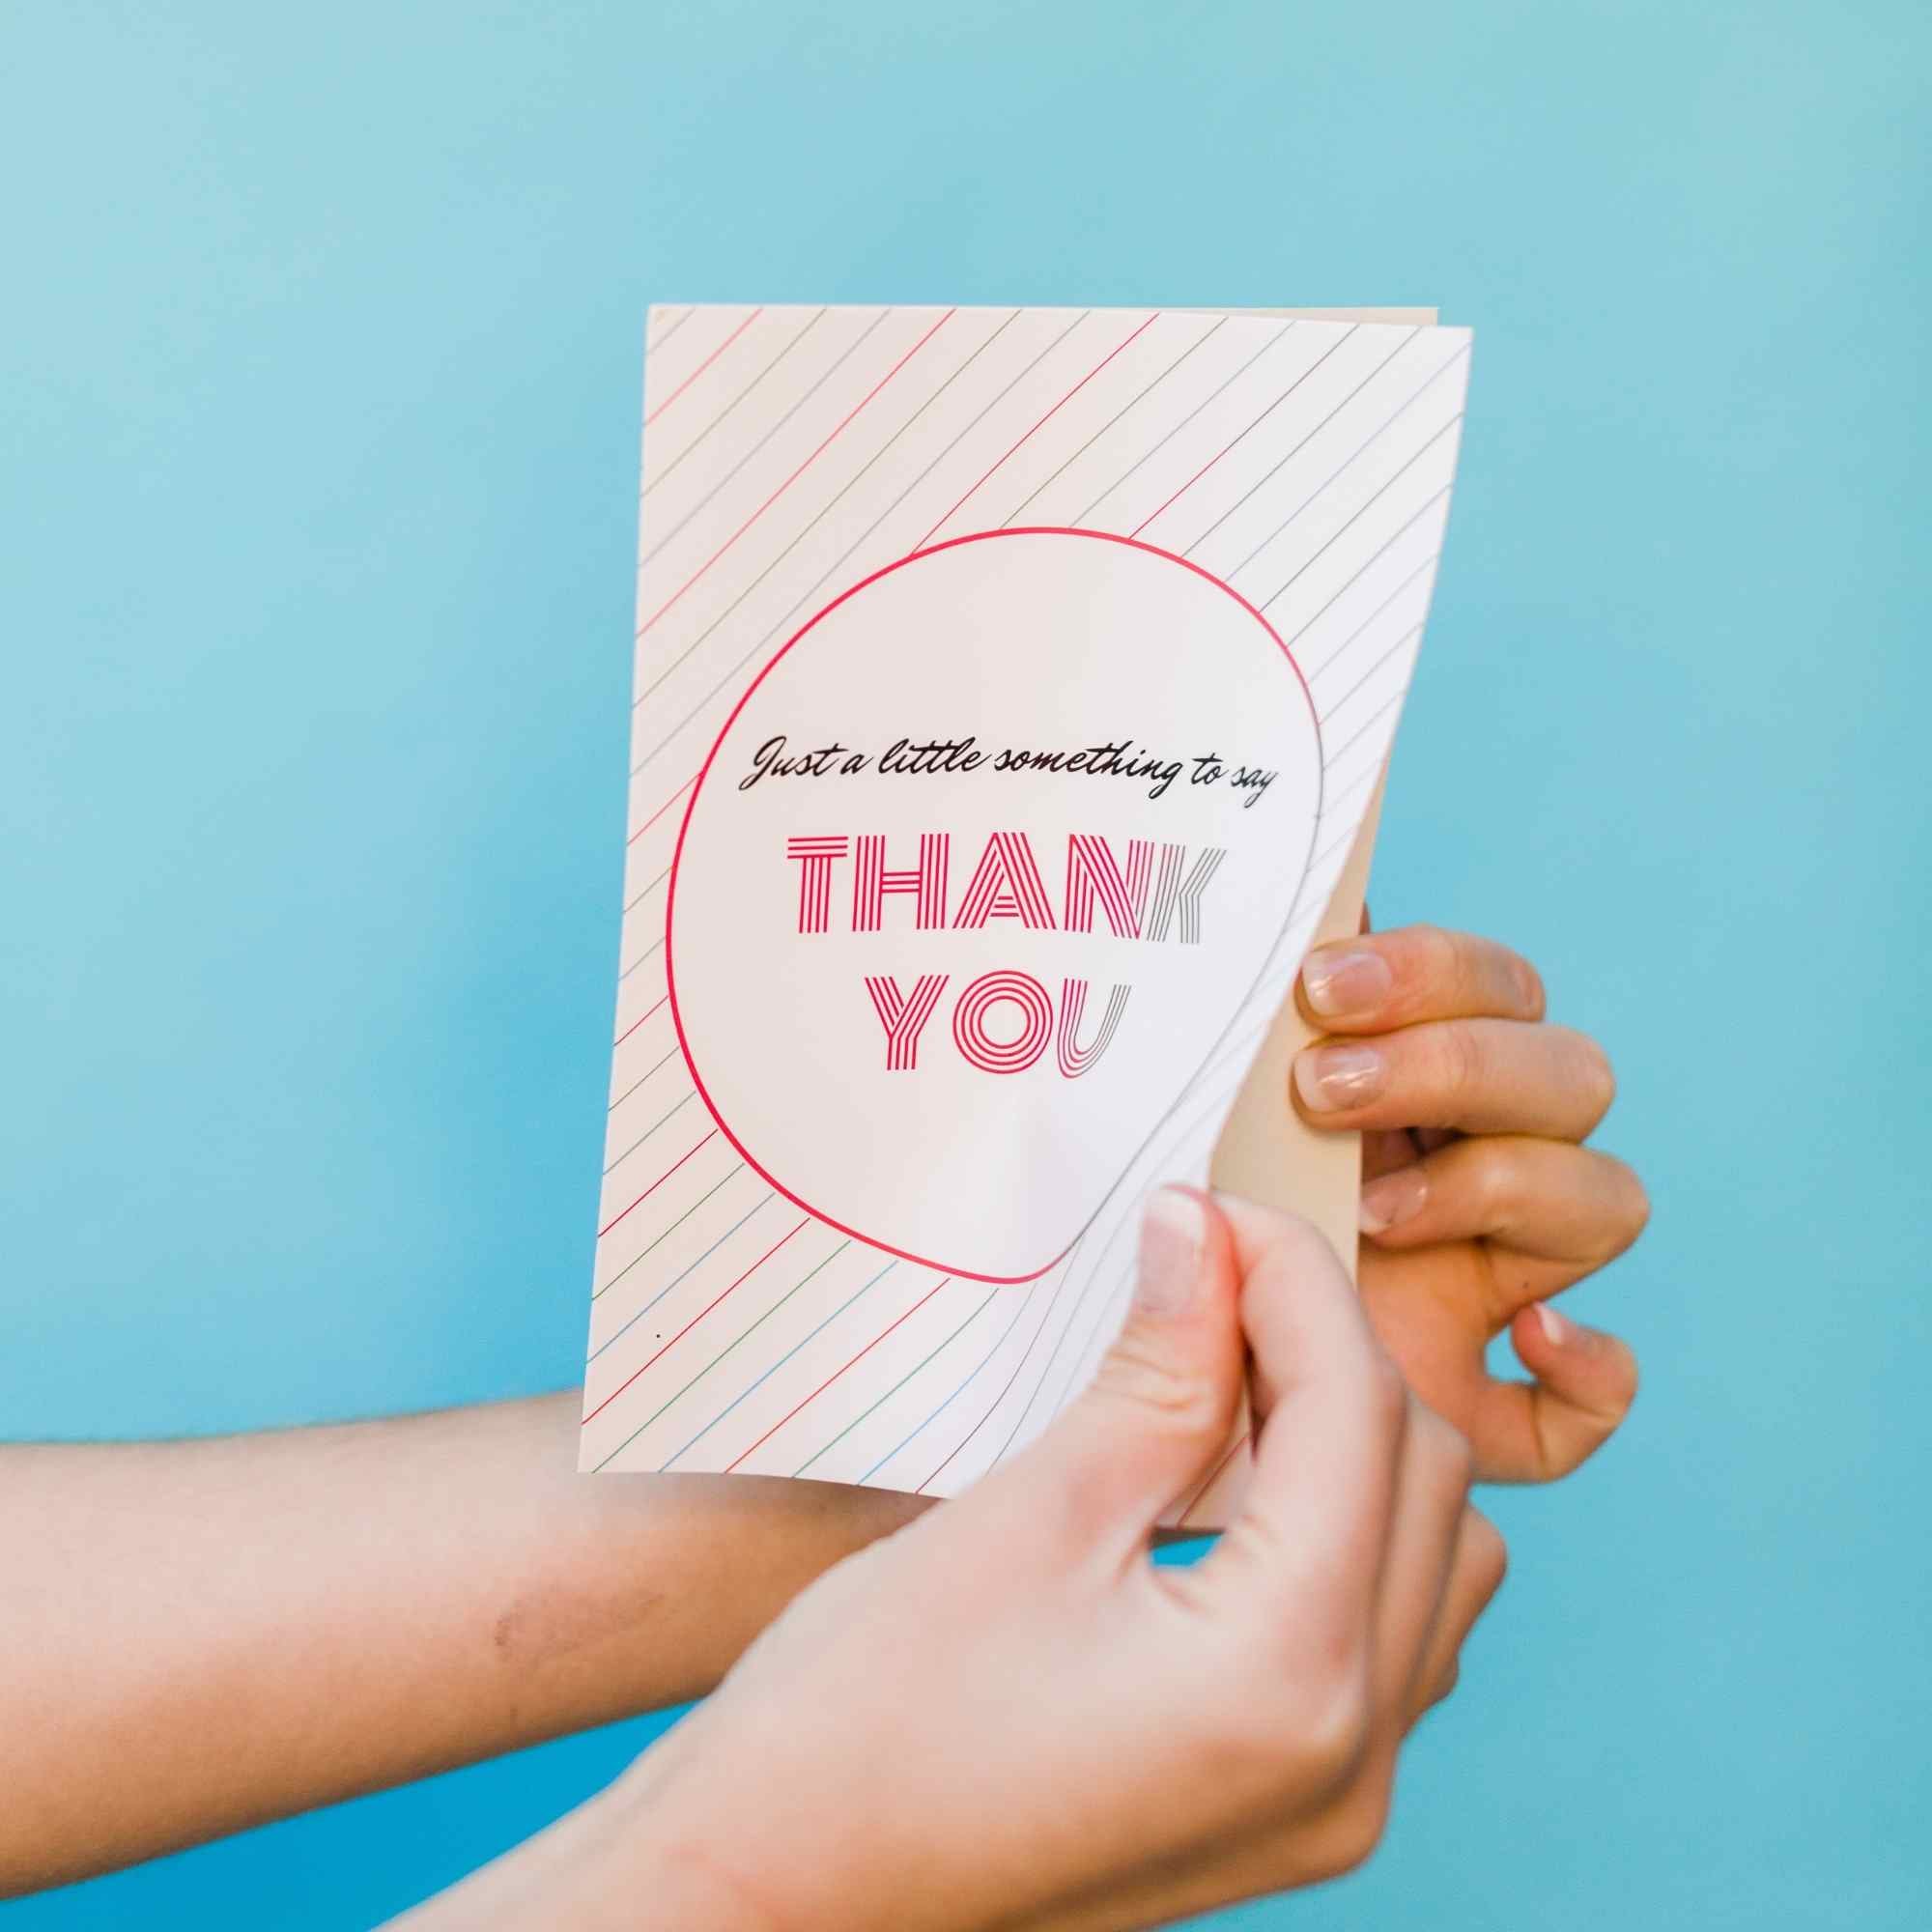 Thank You - Glitter Bomb Card Pranks Anonymous send hilarious pranks and gag gifts to your friends or family.